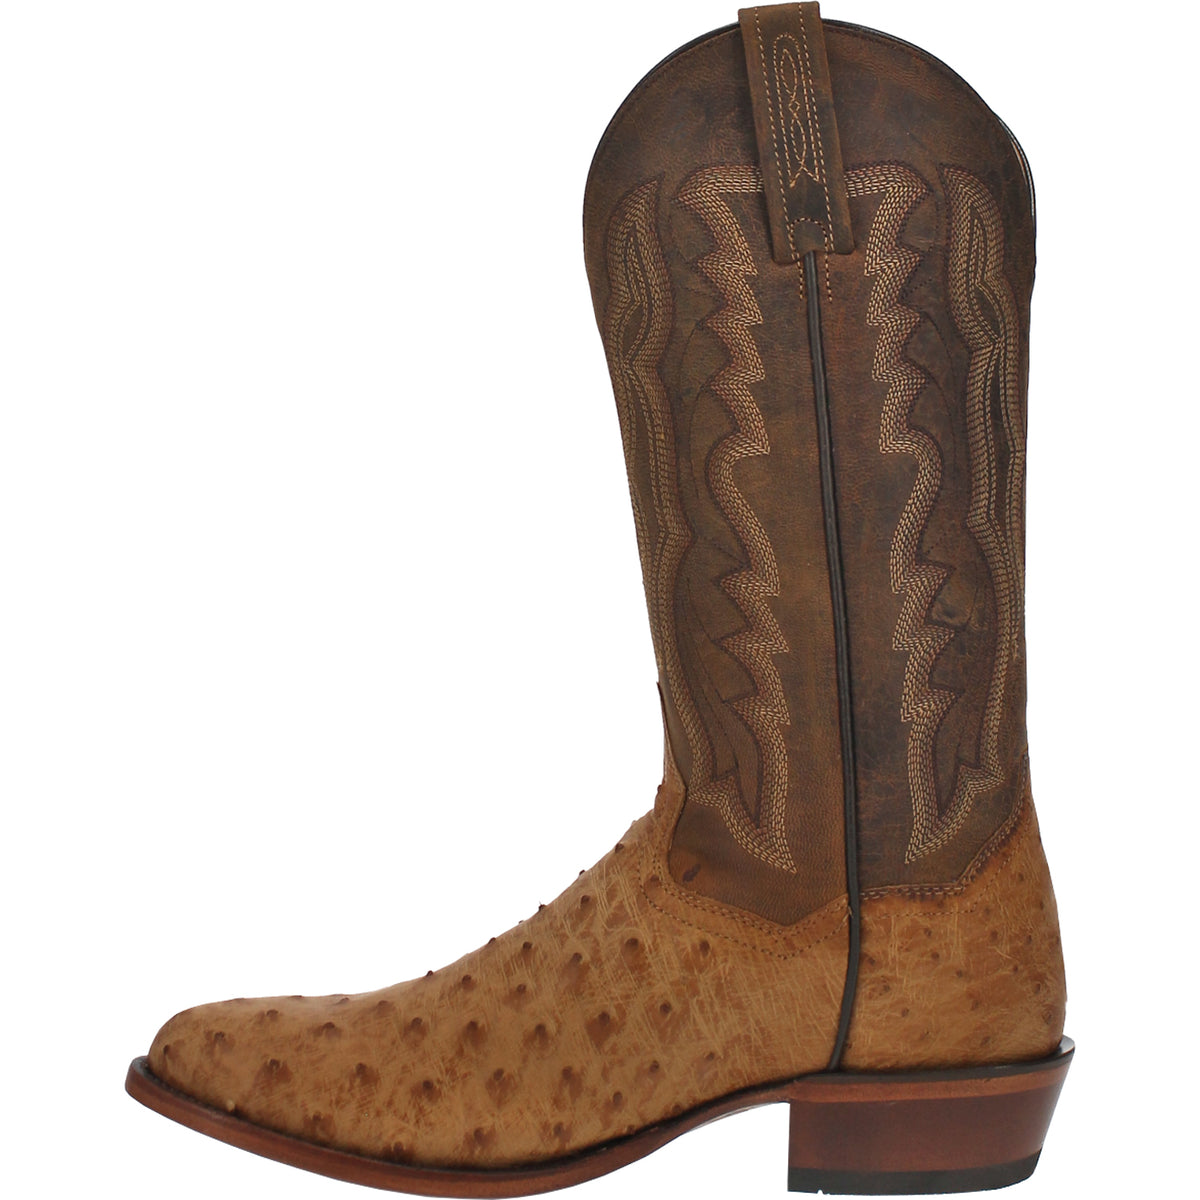 GEHRIG FULL QUILL OSTRICH BOOT Image